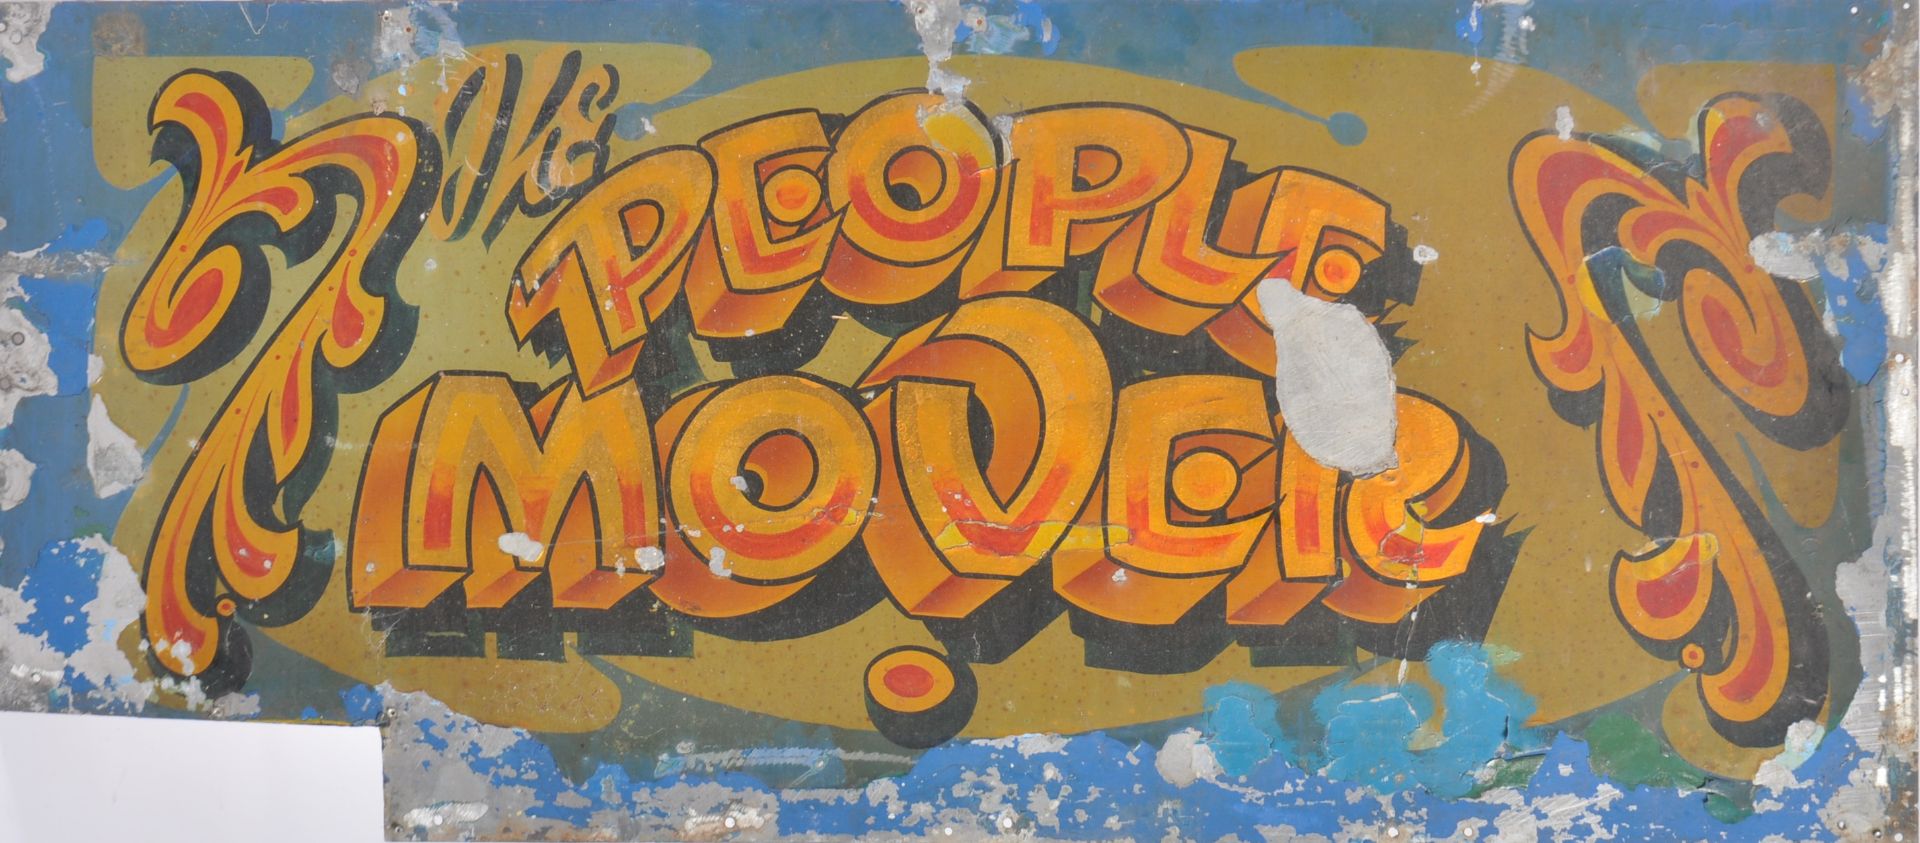 THE PEOPLE MOVER - VINTAGE FAIGROUND PAINTED PANEL